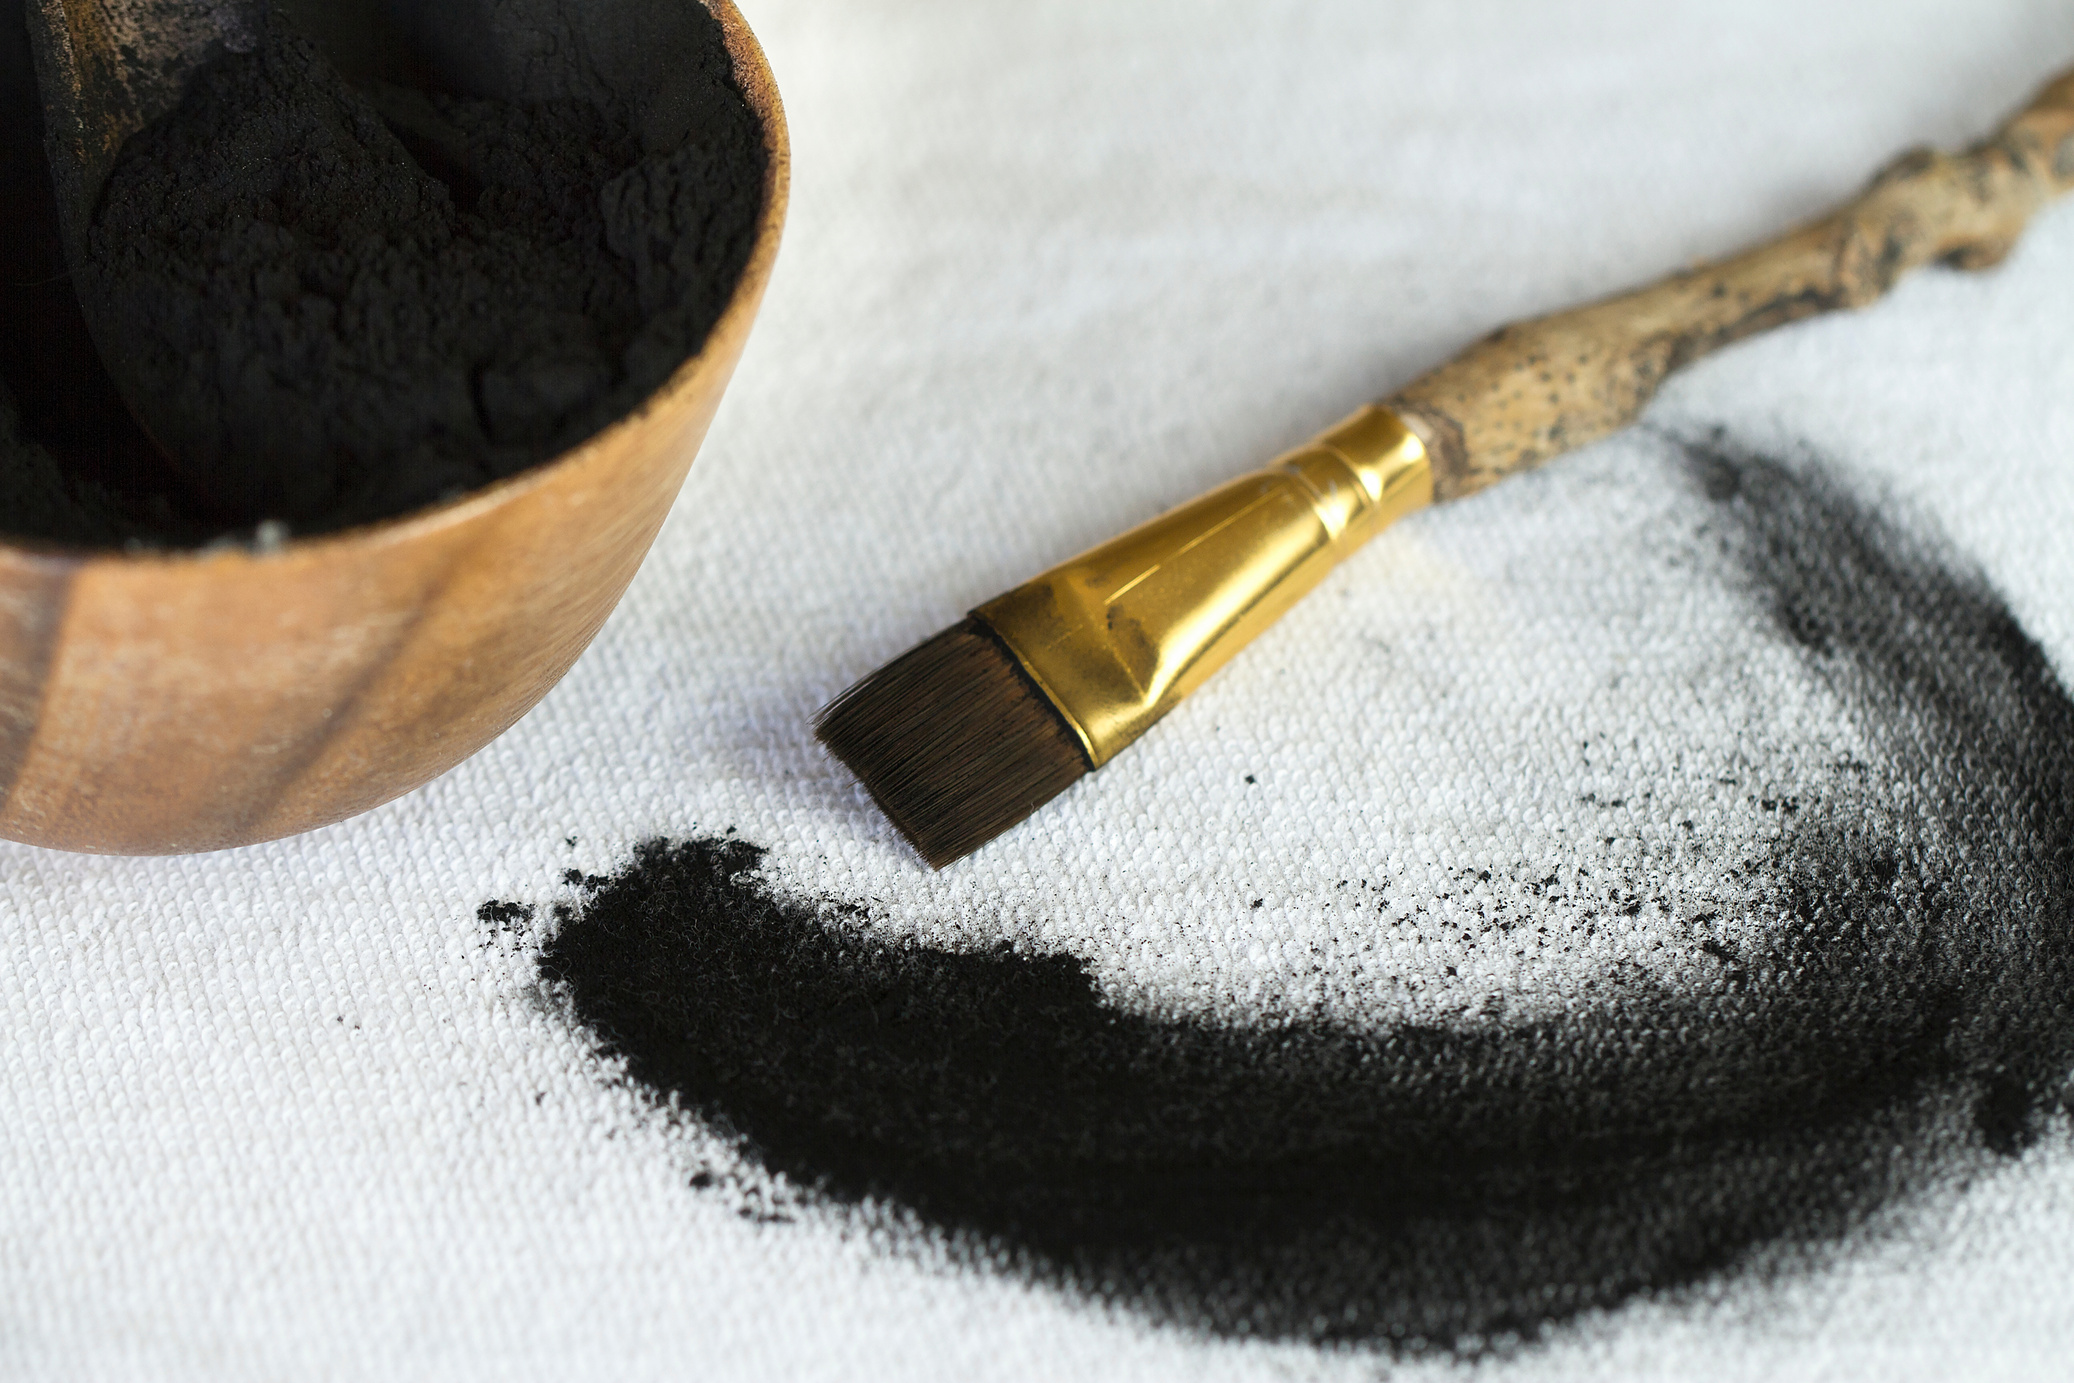 Activated Charcoal Powder and a Natural Wooden Branch Brush for Application